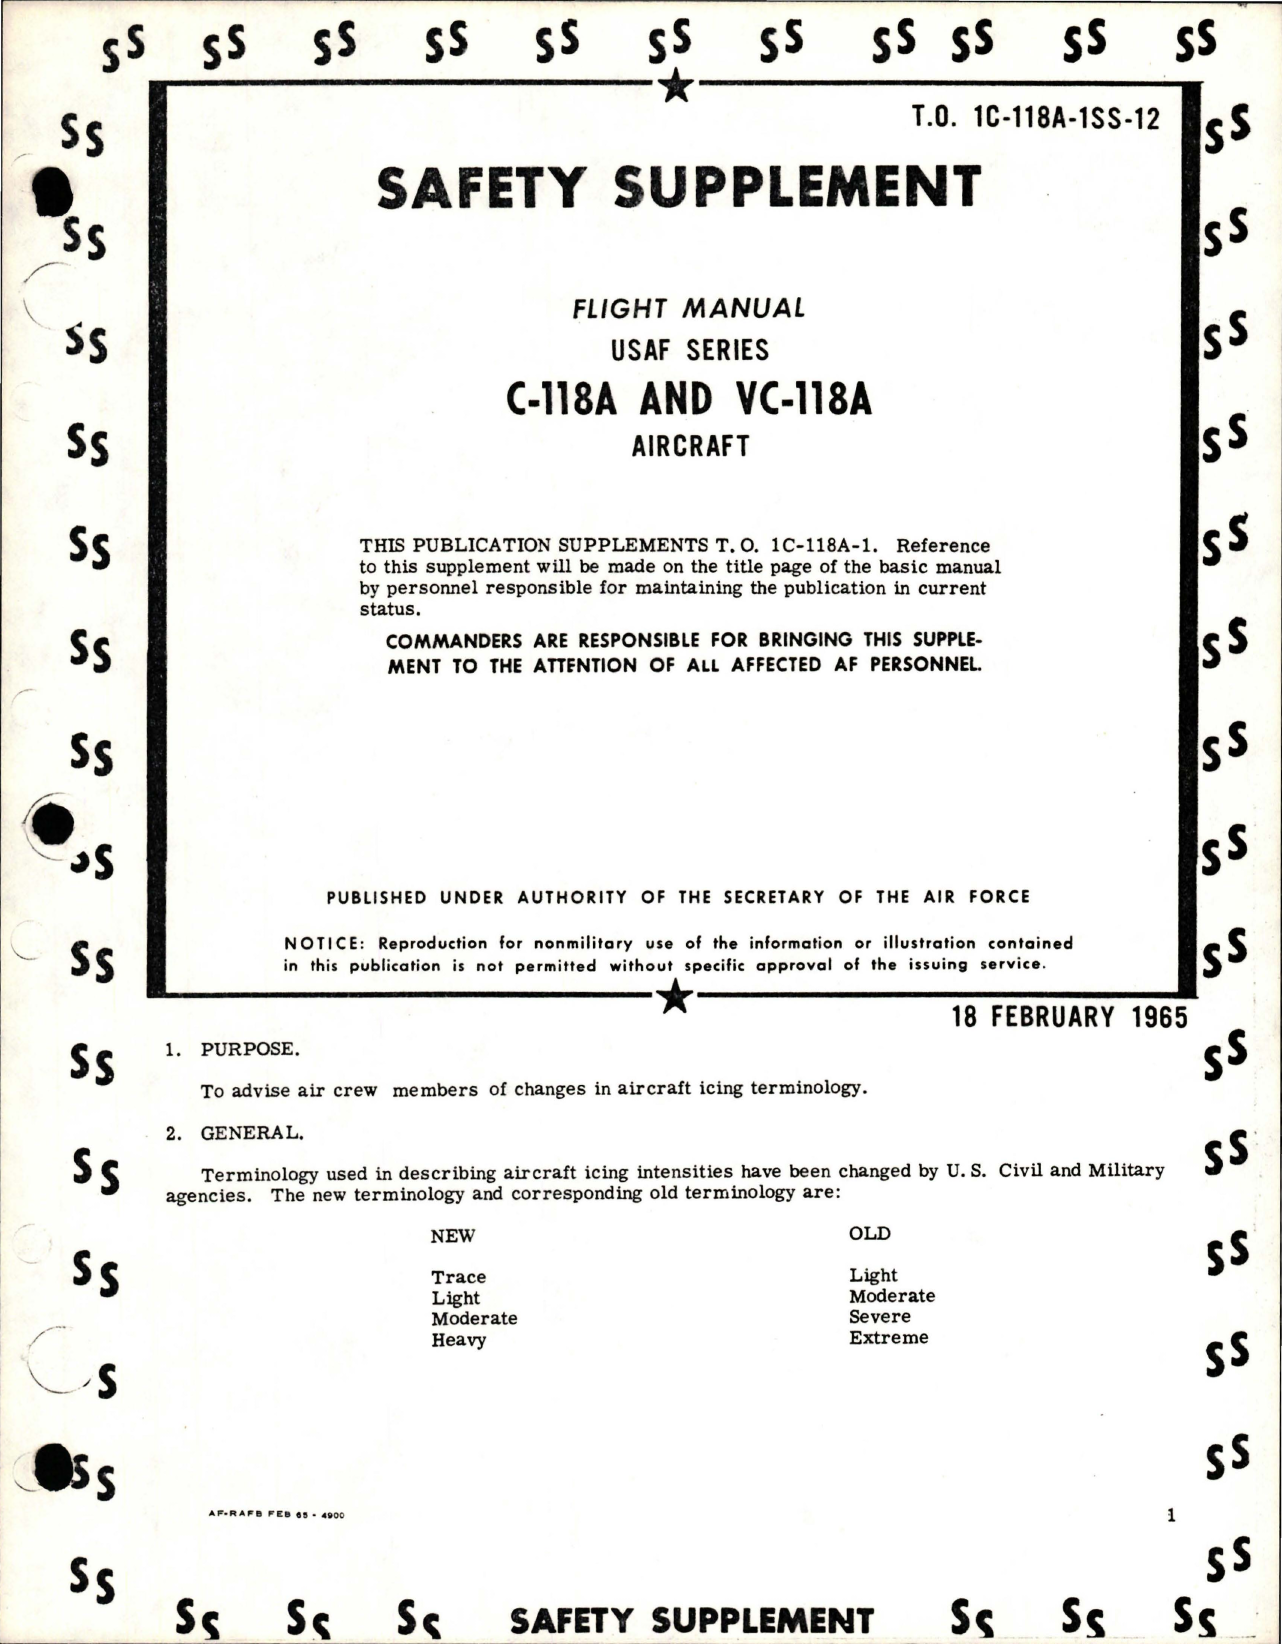 Sample page 1 from AirCorps Library document: Safety Supplement to Flight Manual for C-118A and VC-118A